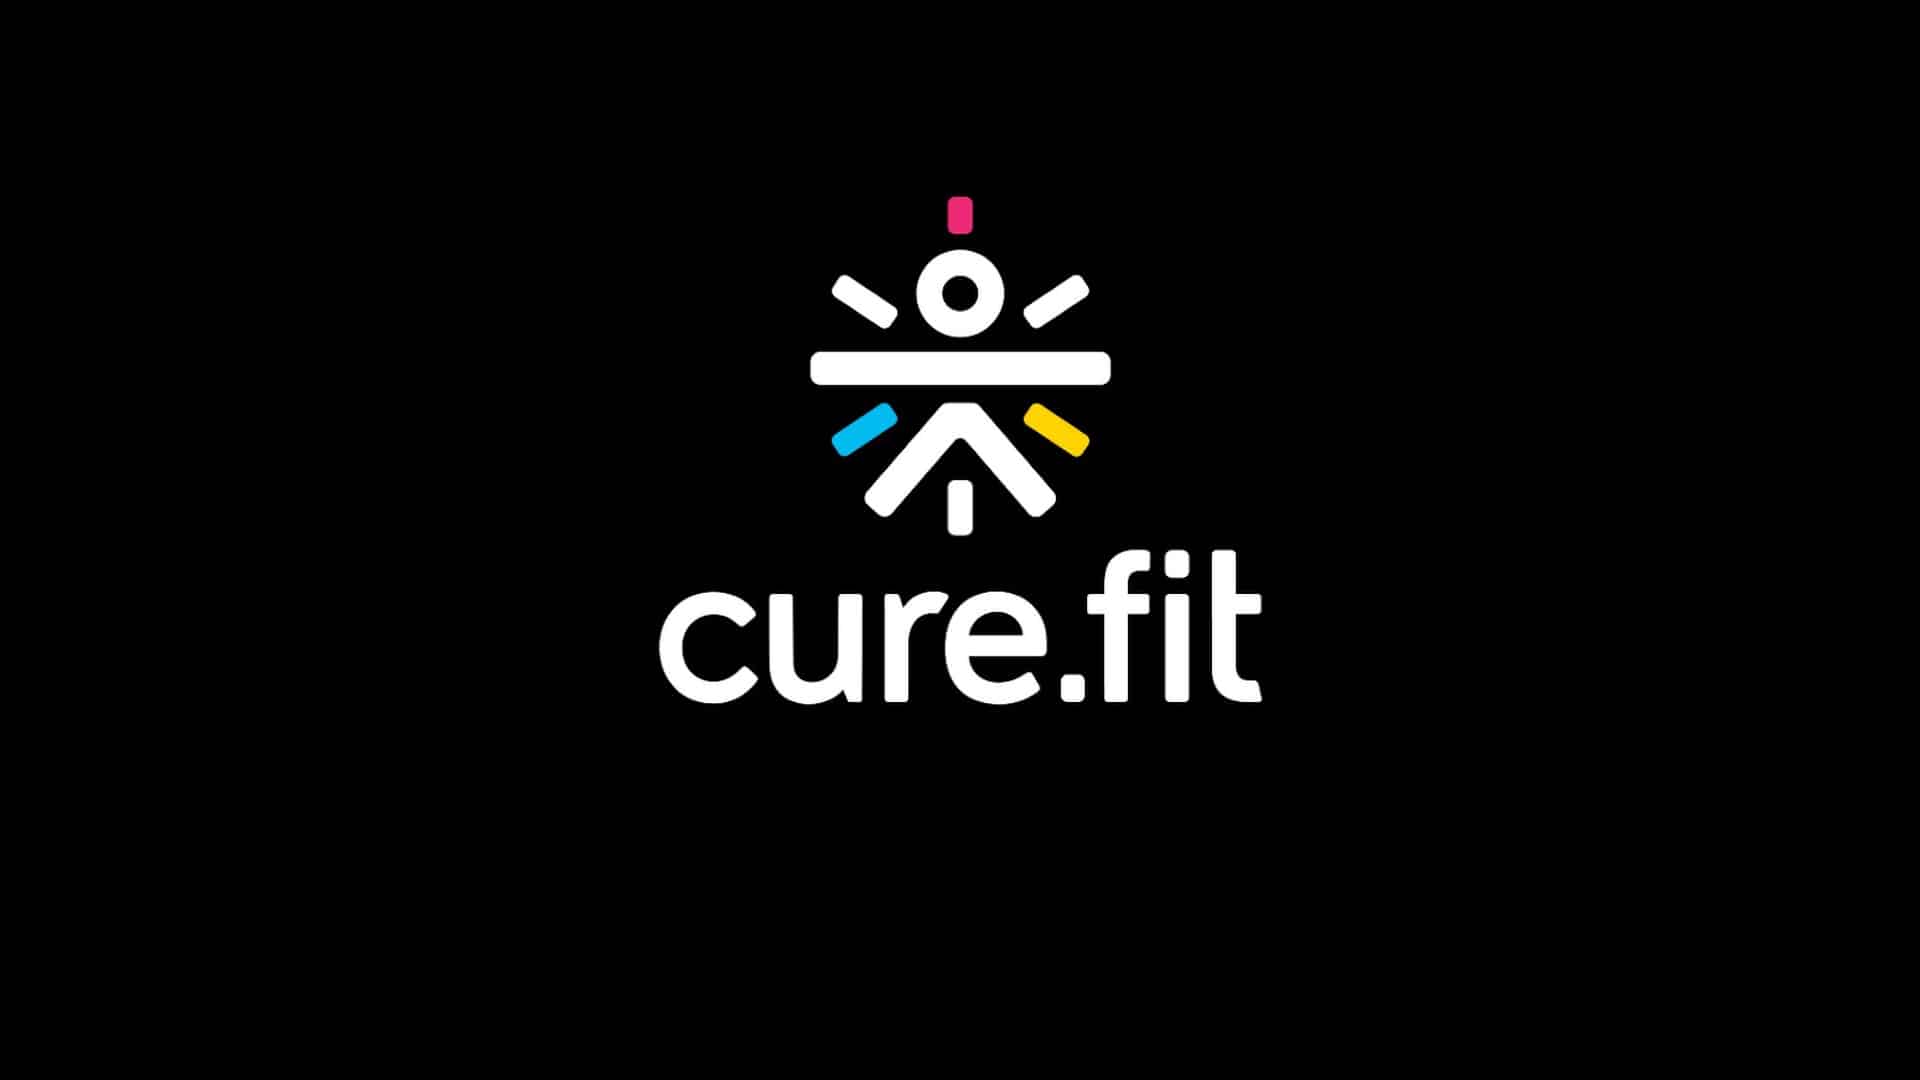 Cure.fit acquires US-based digital fitness company Onyx to accelerate international offering